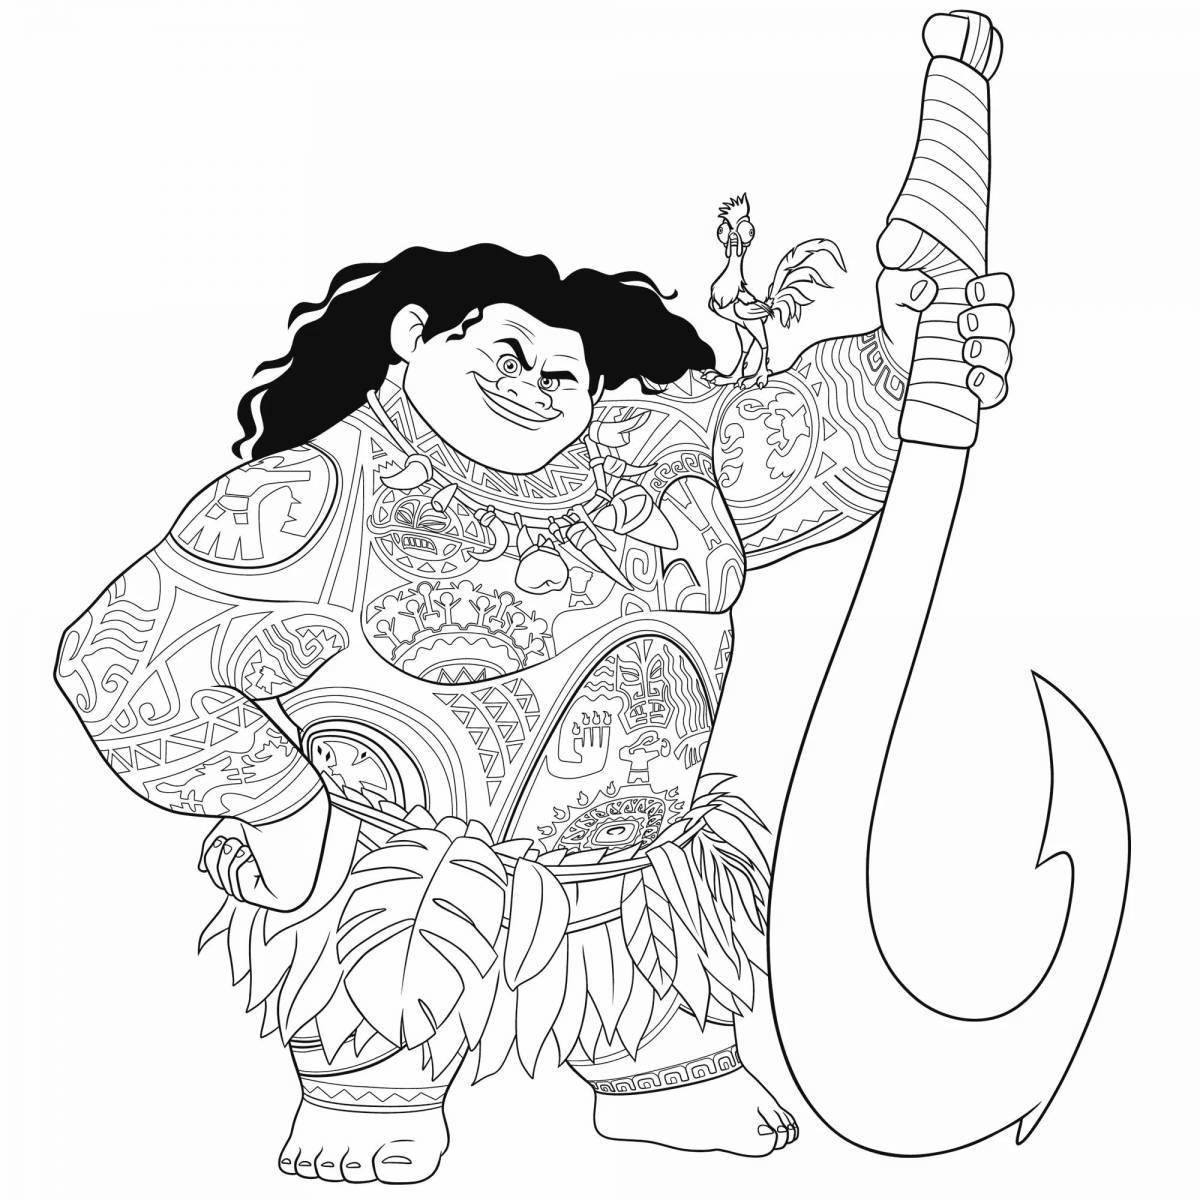 A wonderful moana coloring book for kids